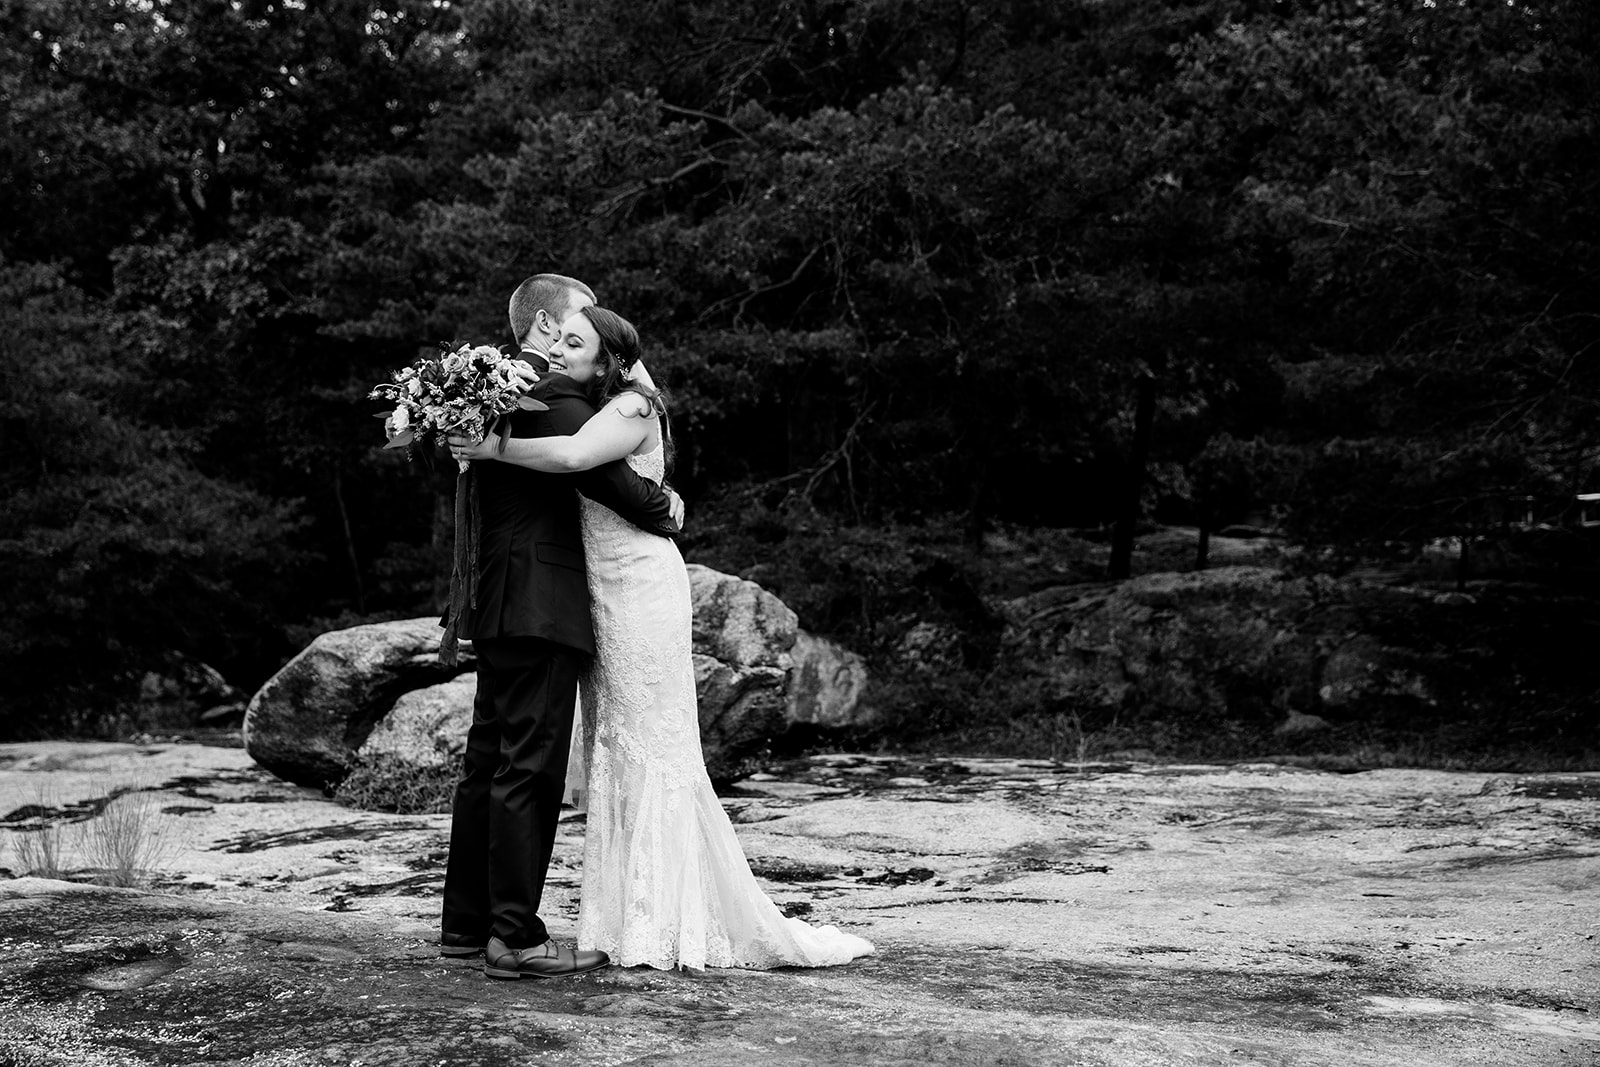 Nicole  Zachs Fall Wedding at The Mill at Fine Creek - Image Property of www.j-dphoto.com